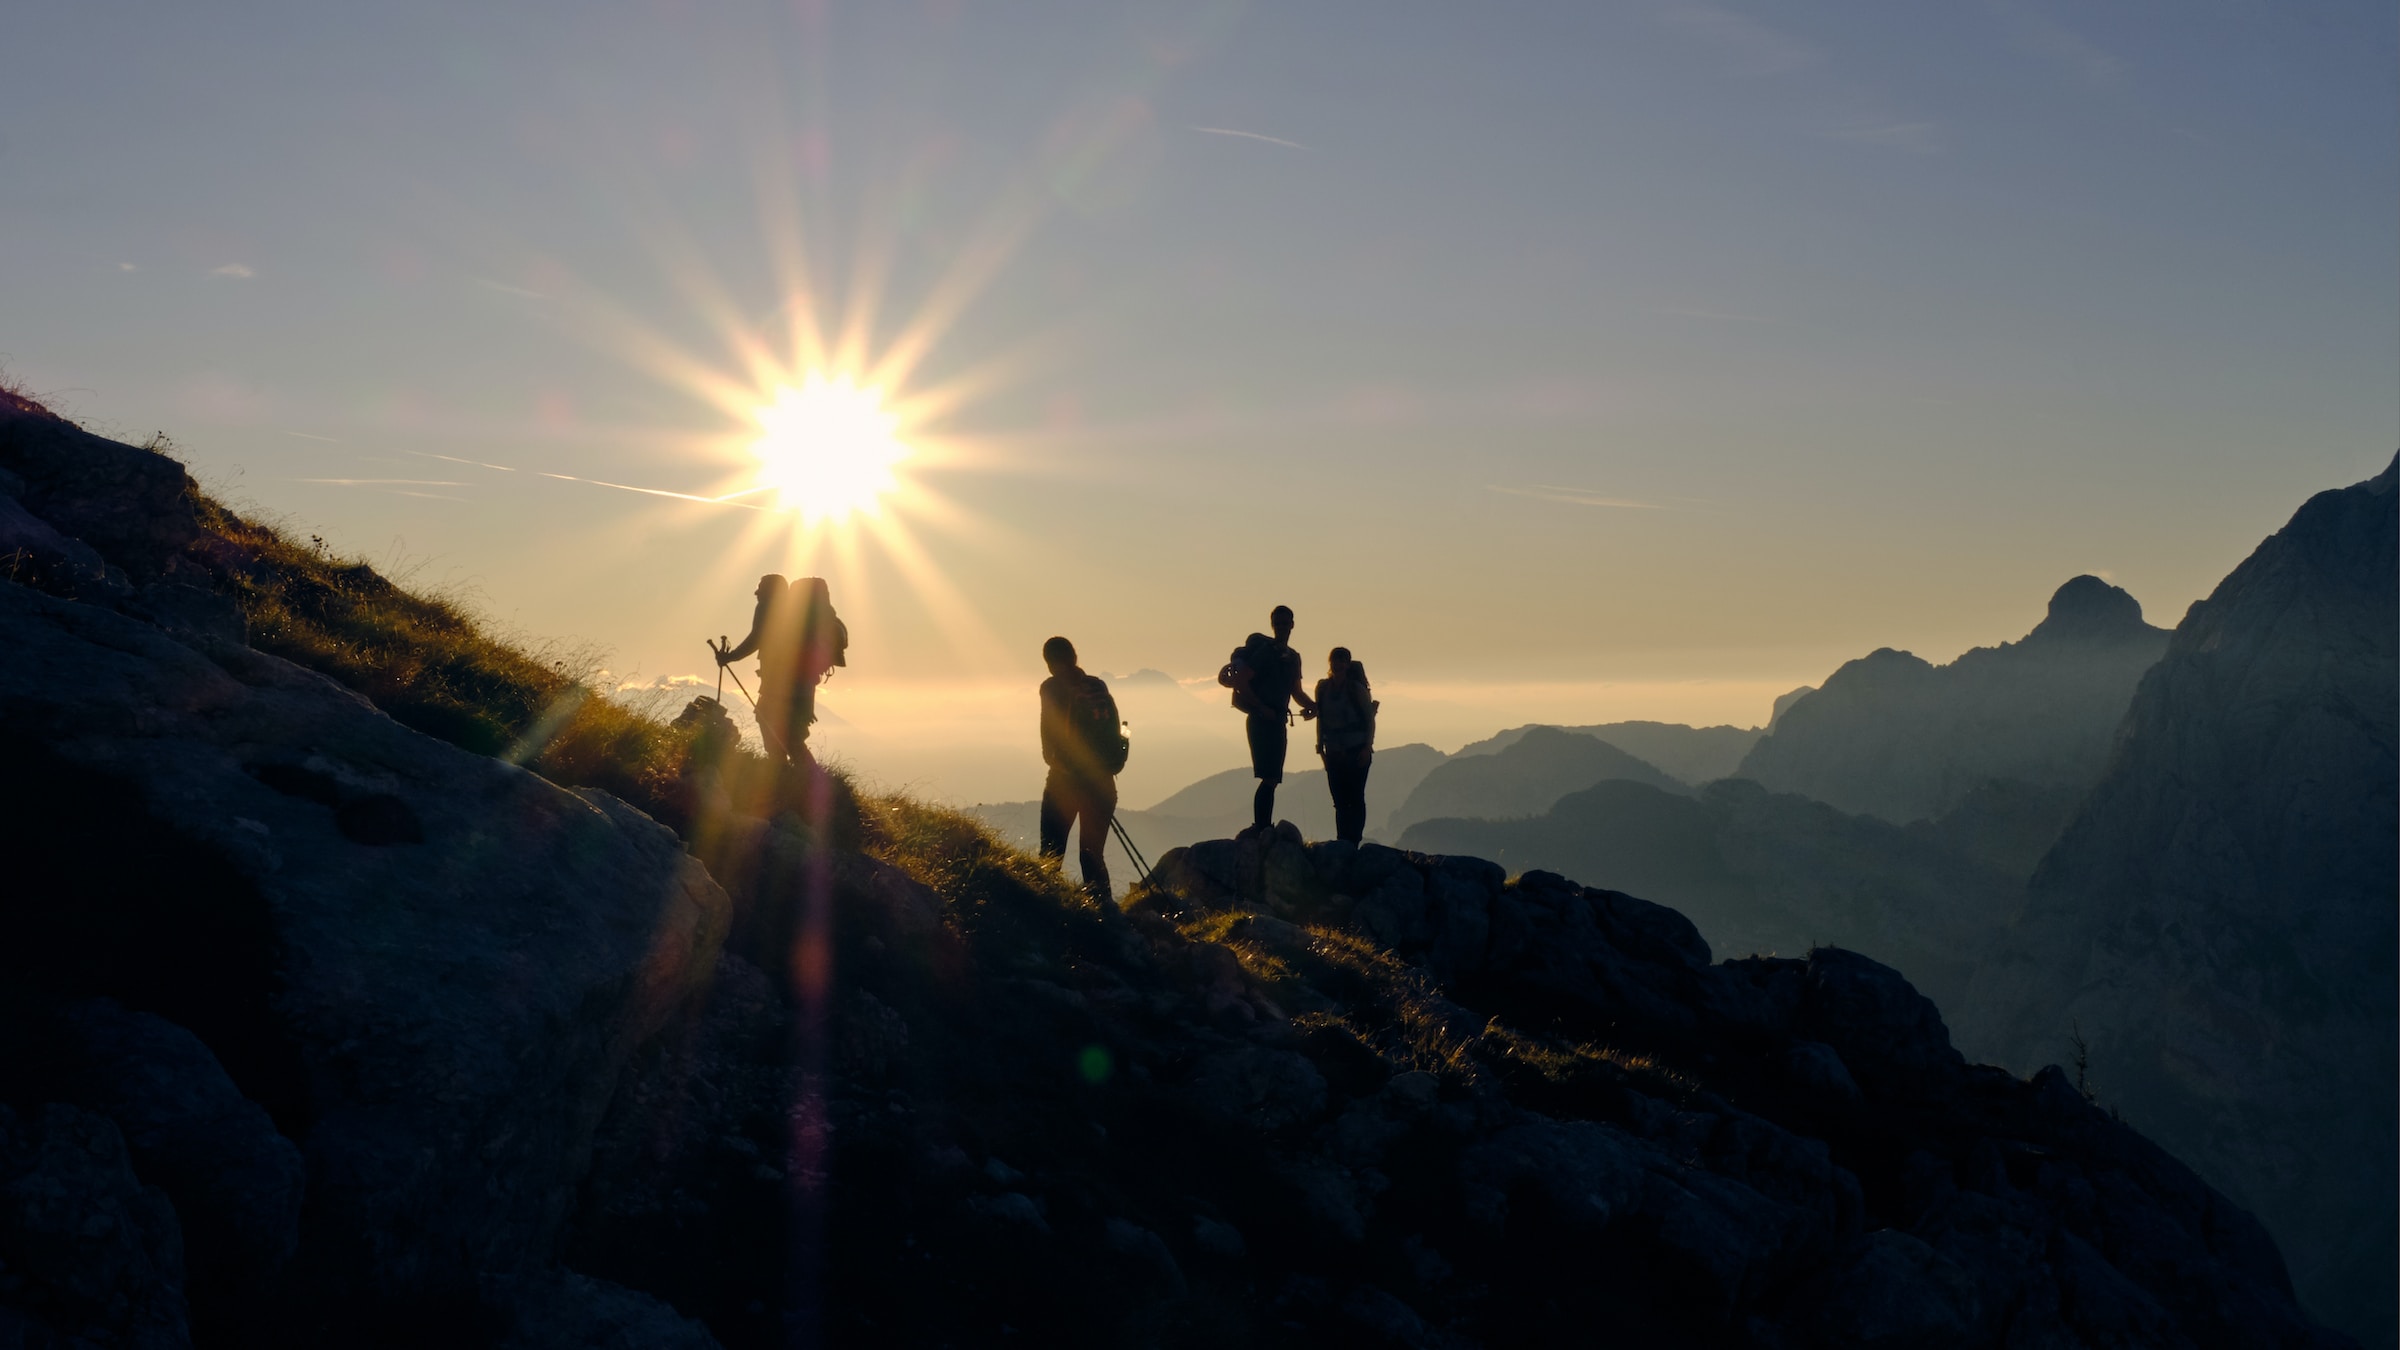 A silhouette of some hikers against the sun